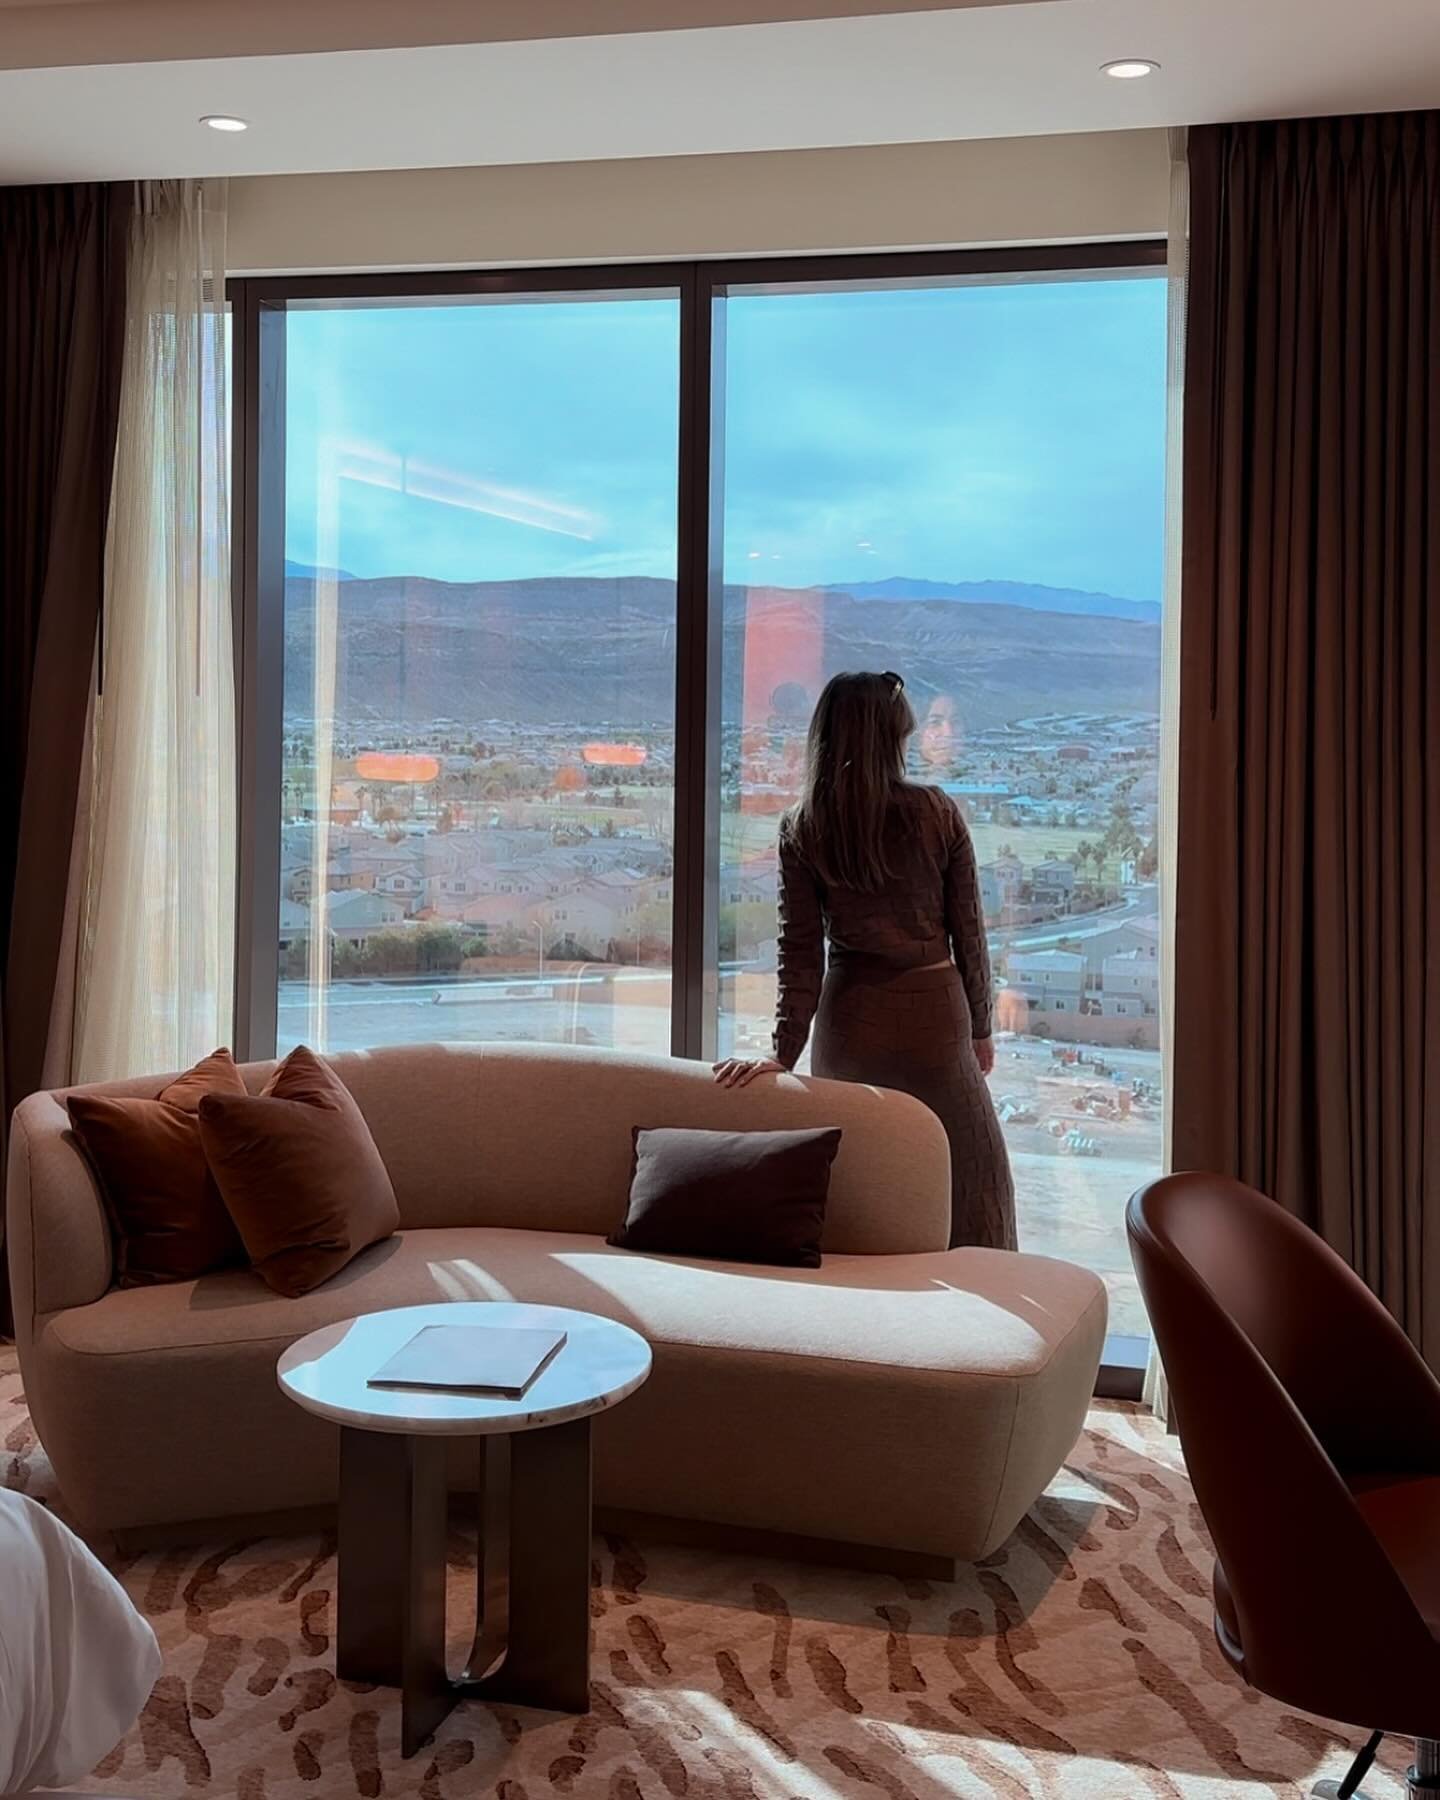 behind-the-scenes of our @durangoresort staycation, along with a peek into my husband&rsquo;s unplanned venture into content creation 🤭🤳💃[audio on] shout-out to all the #supportivepartners 🫶

for more details about our trip, visit the LINK in my 